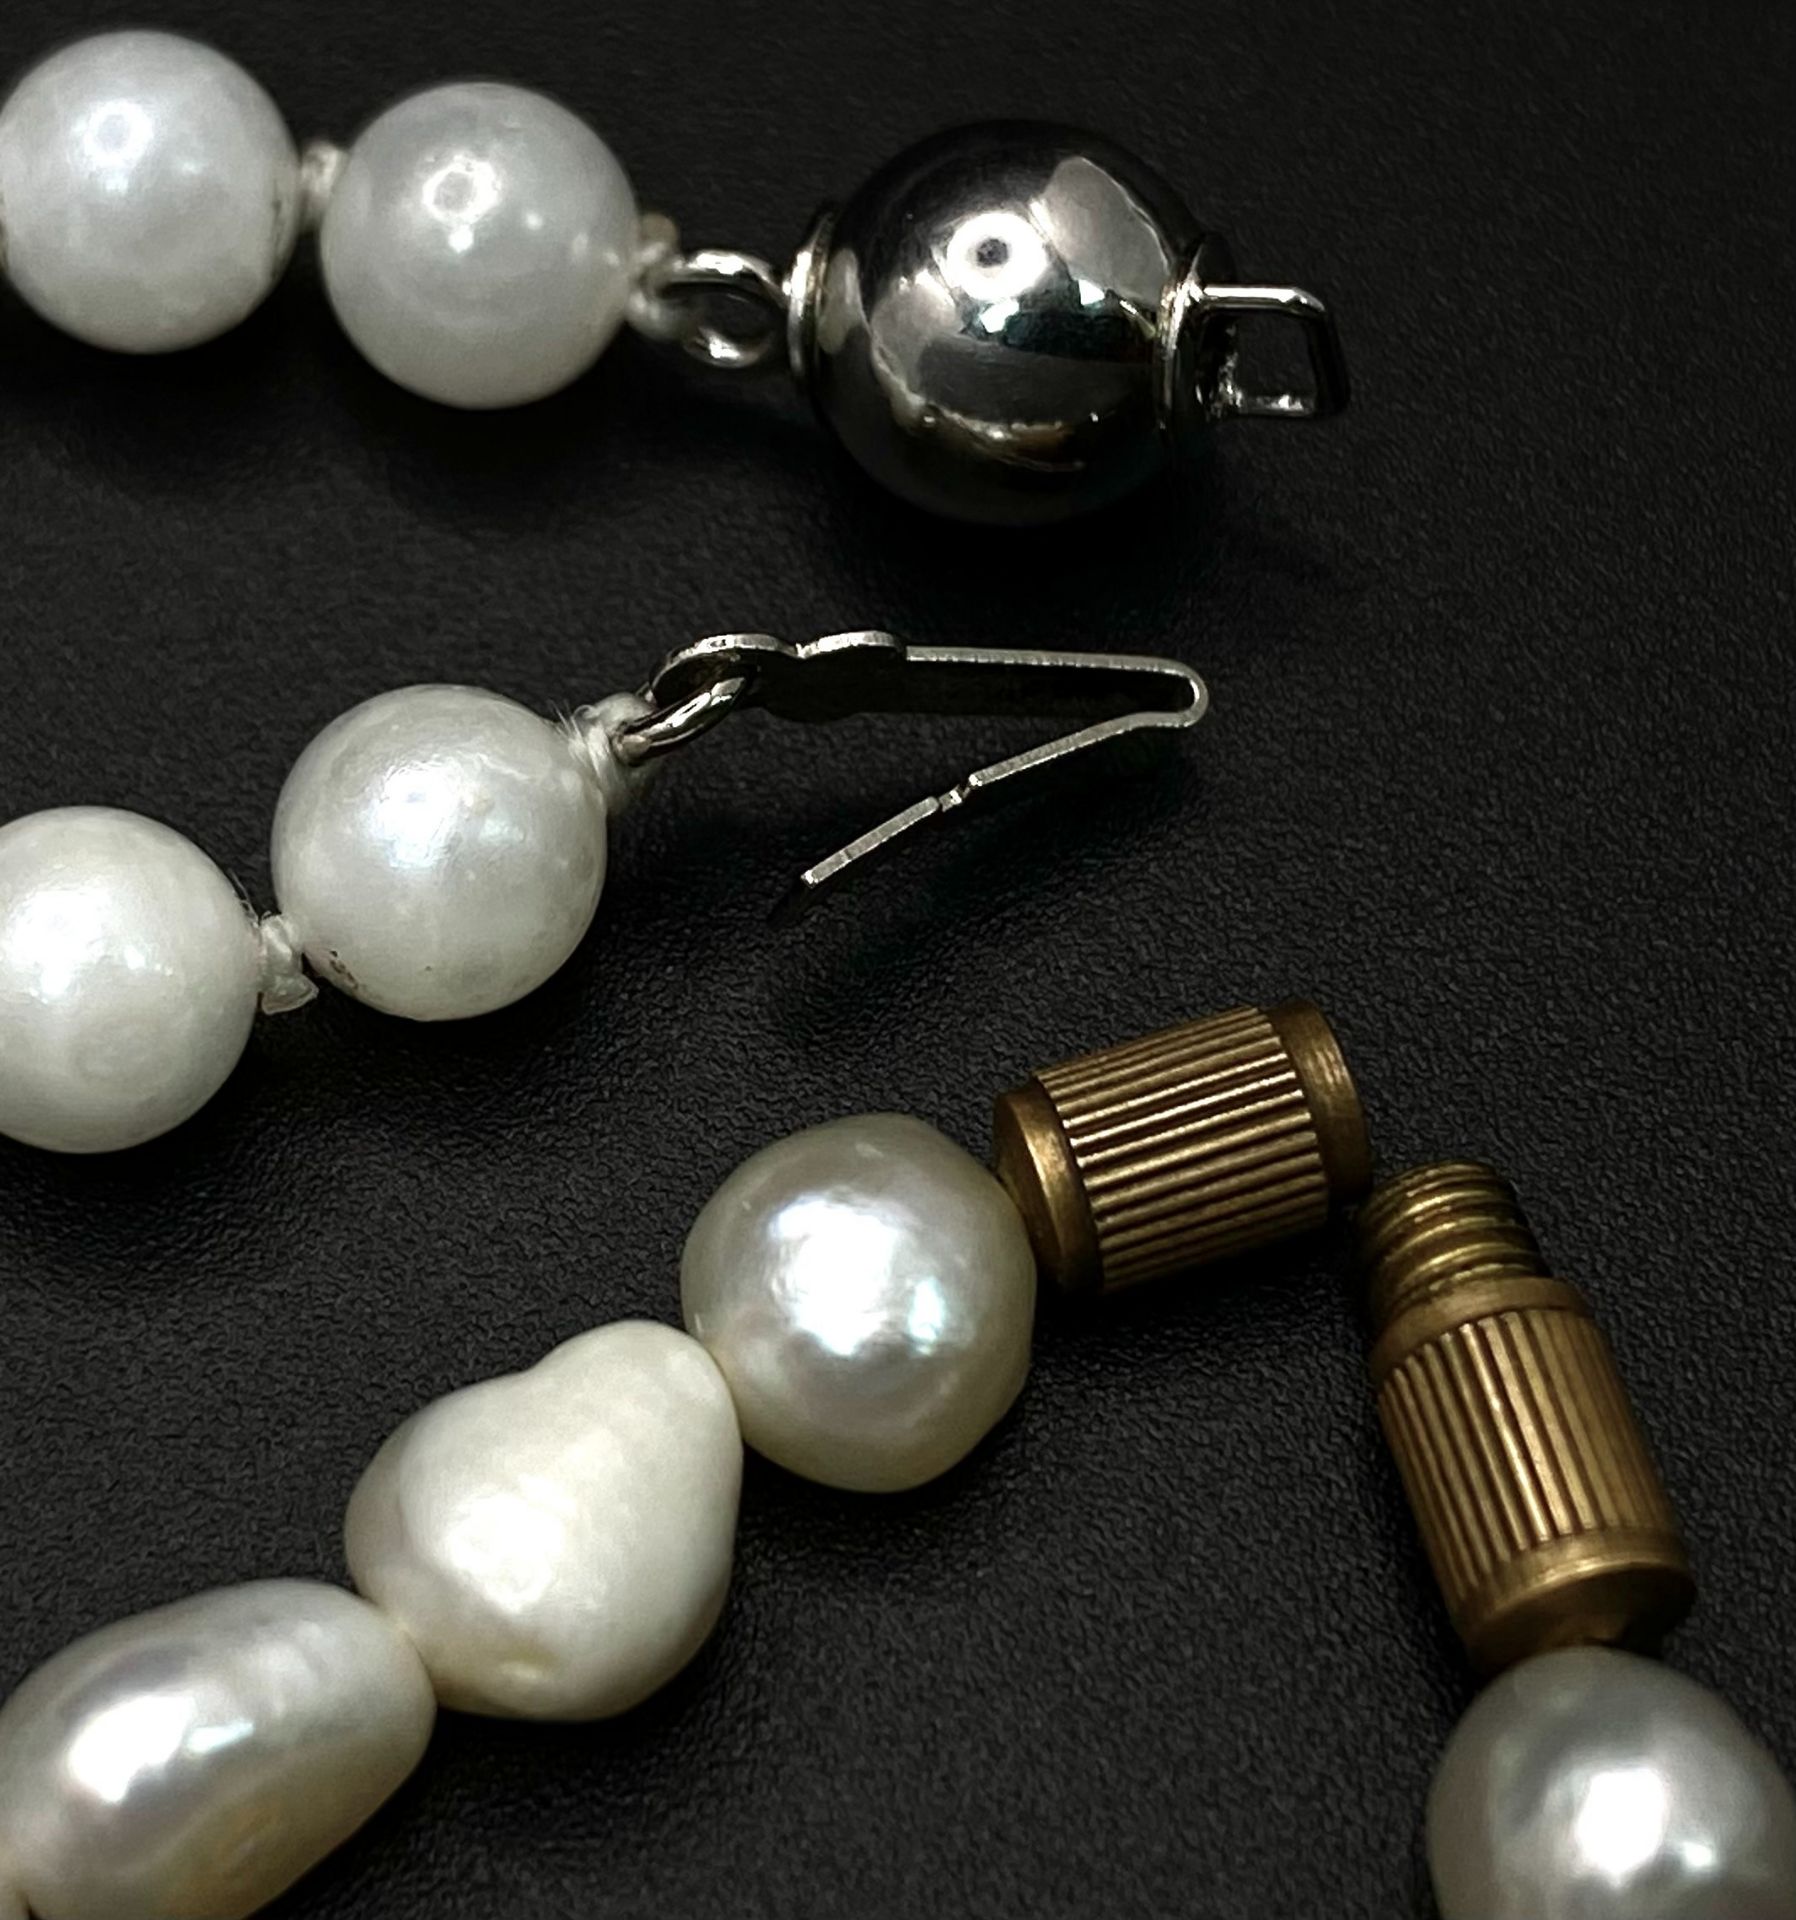 2 x Cultured Pearl Necklaces. 45cm and 91cm length. 62.75g total weight. - Image 3 of 5